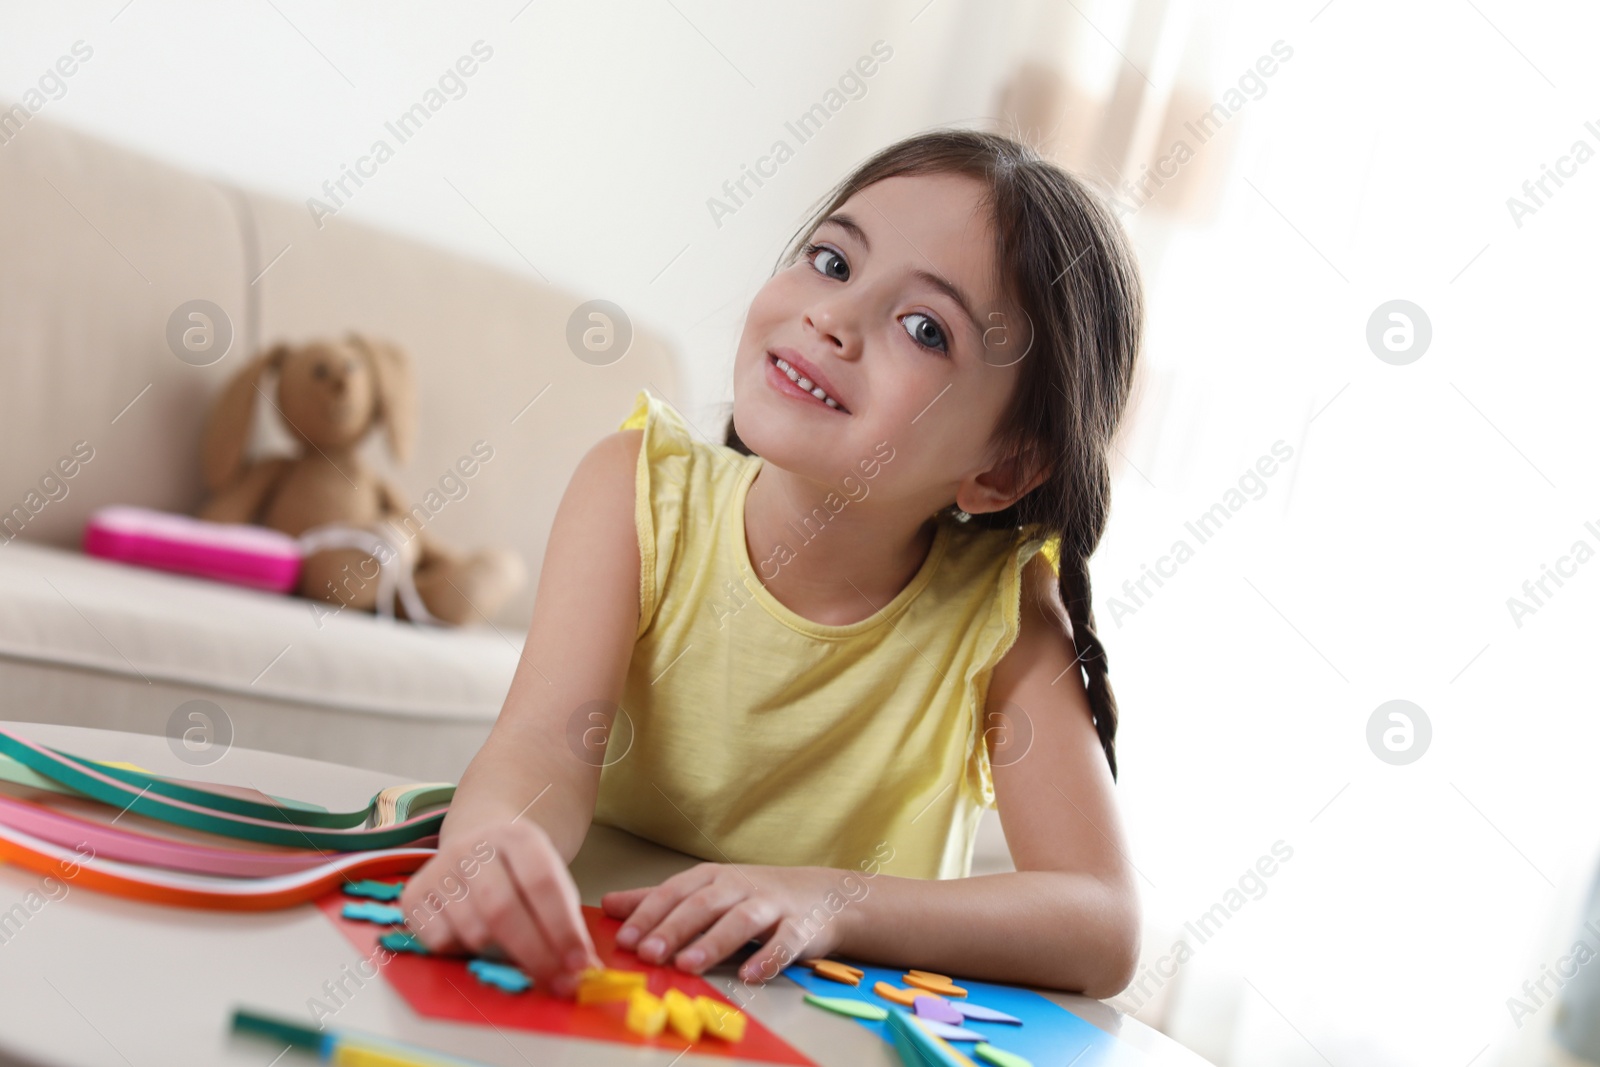 Photo of Little girl quilling at table indoors. Creative hobby